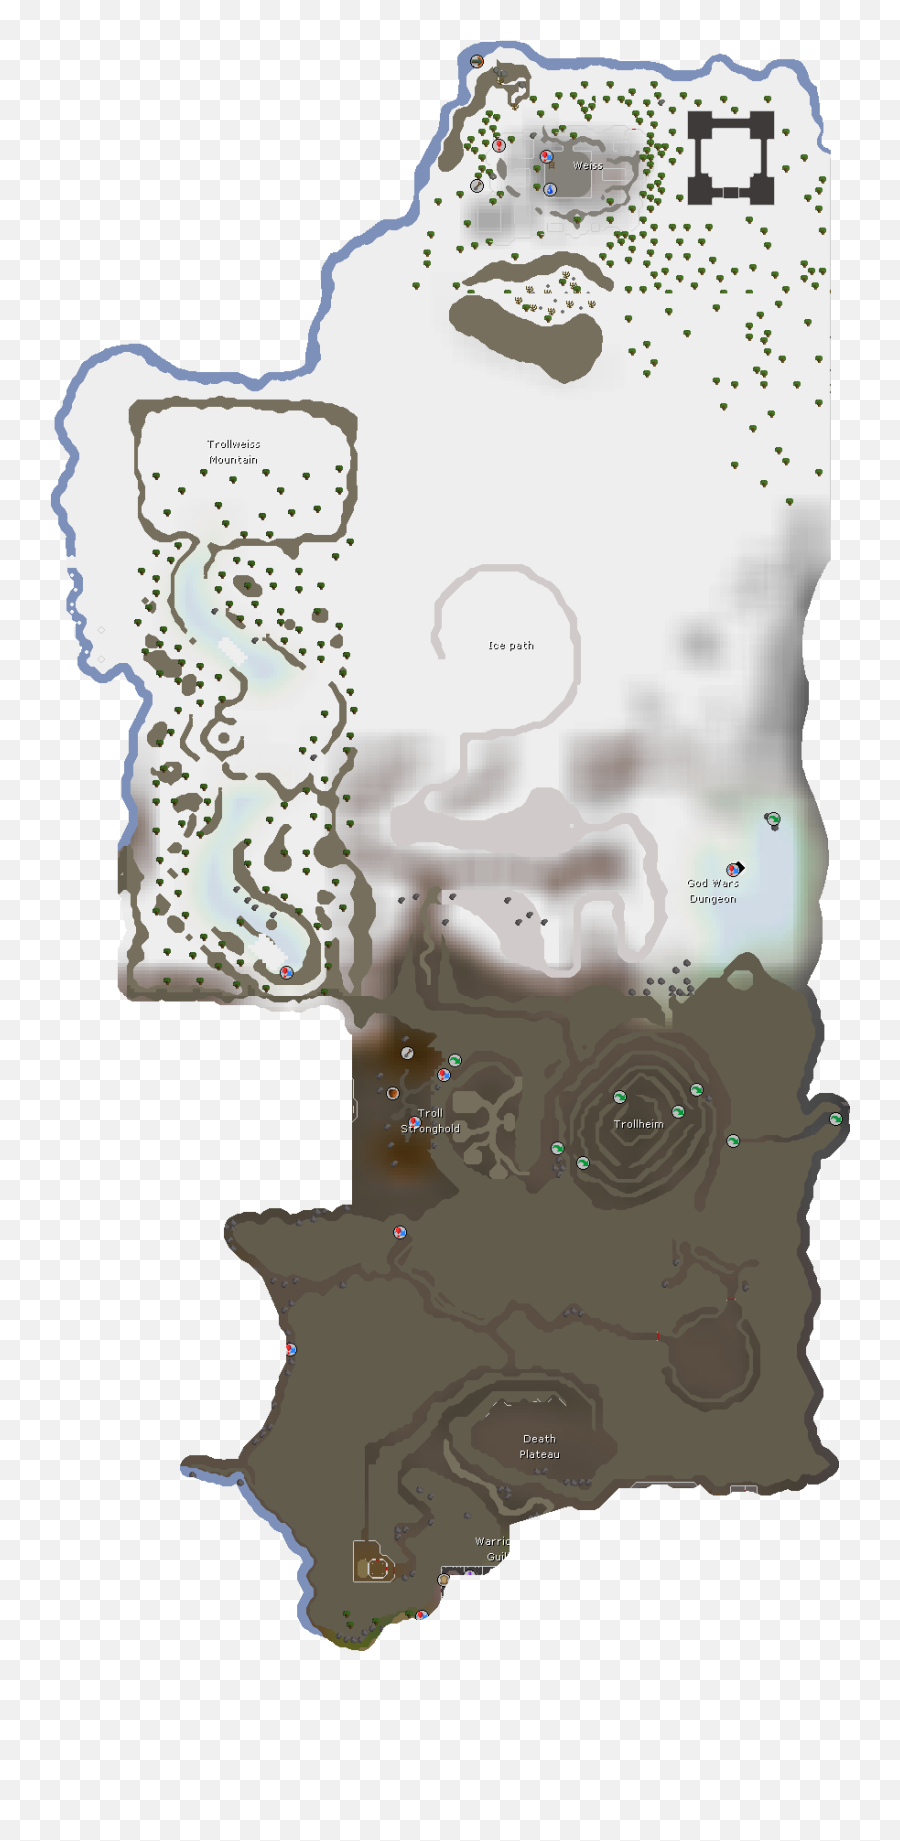 Troll Country - Runescape Png,Troll Png